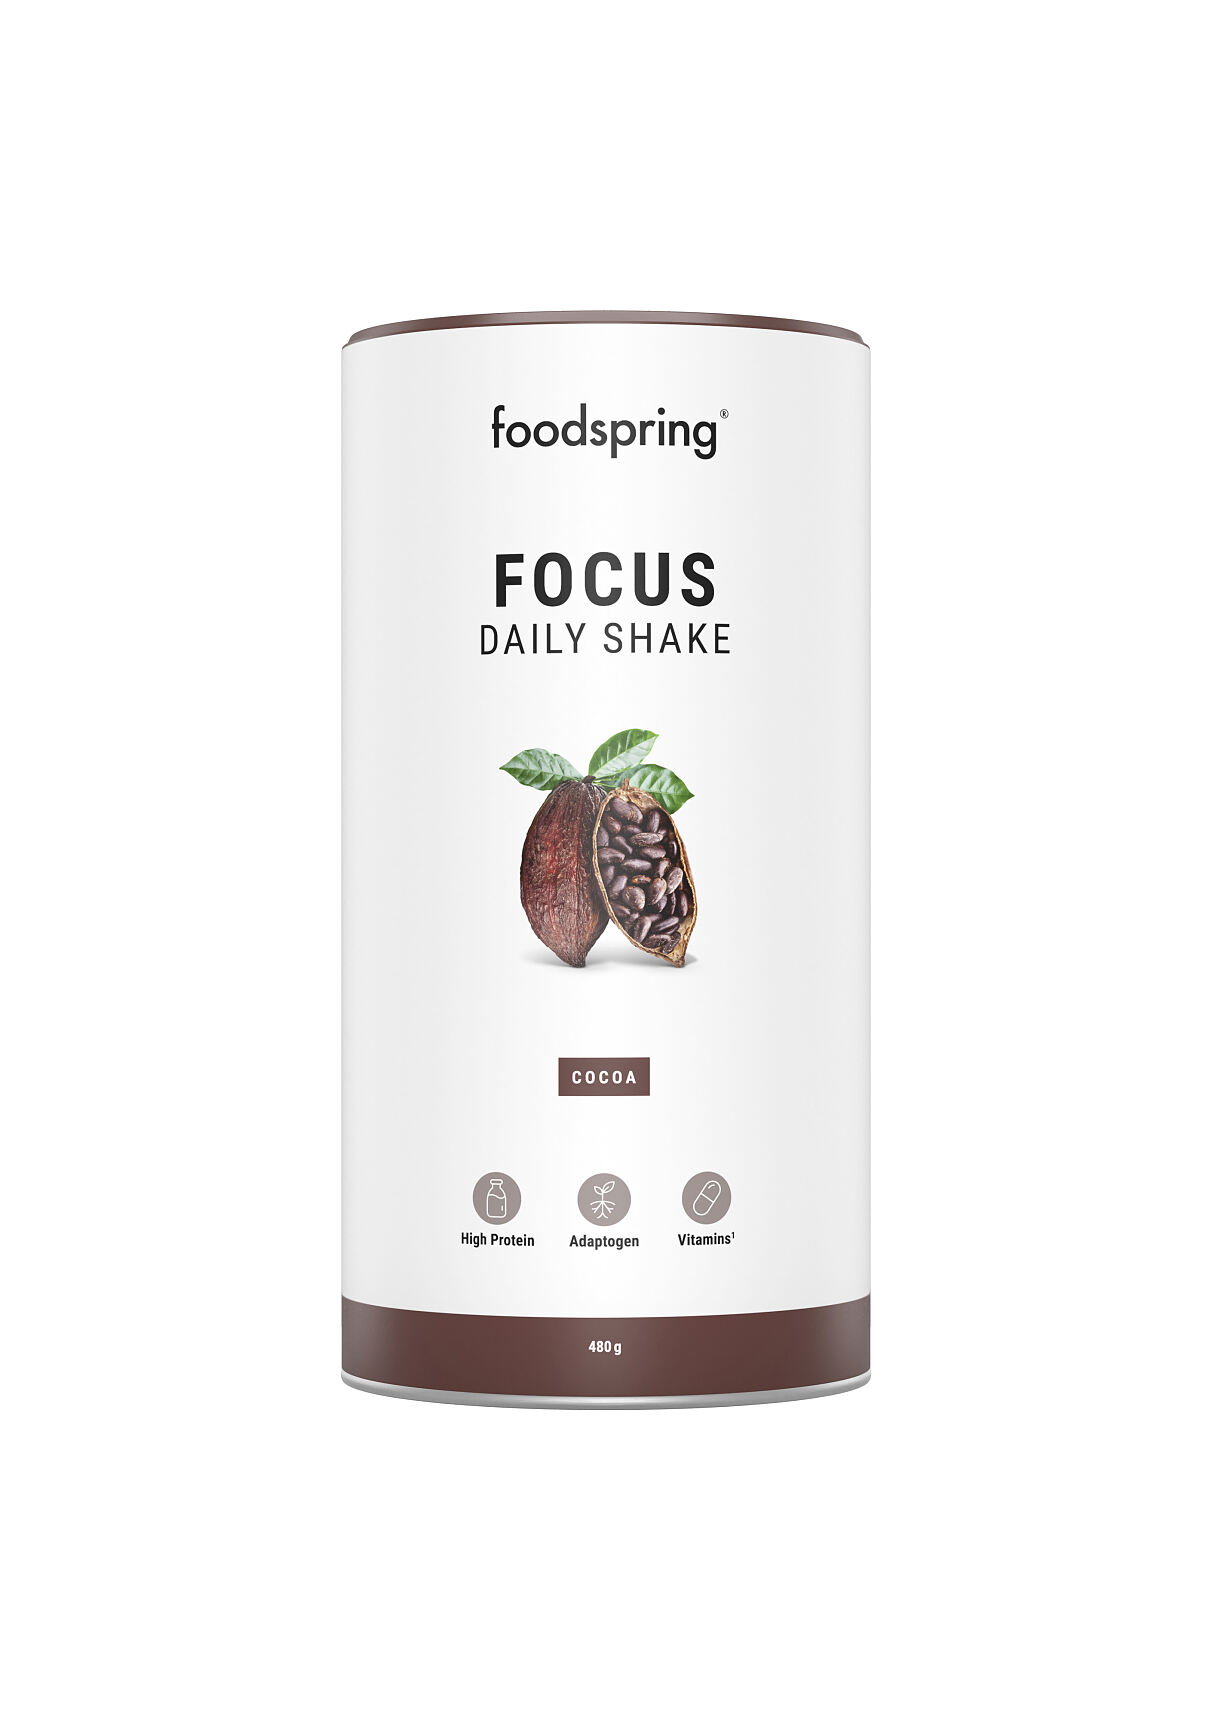 foodspring_Daily Shake Focus_Cocoa_je 32,99 Euro